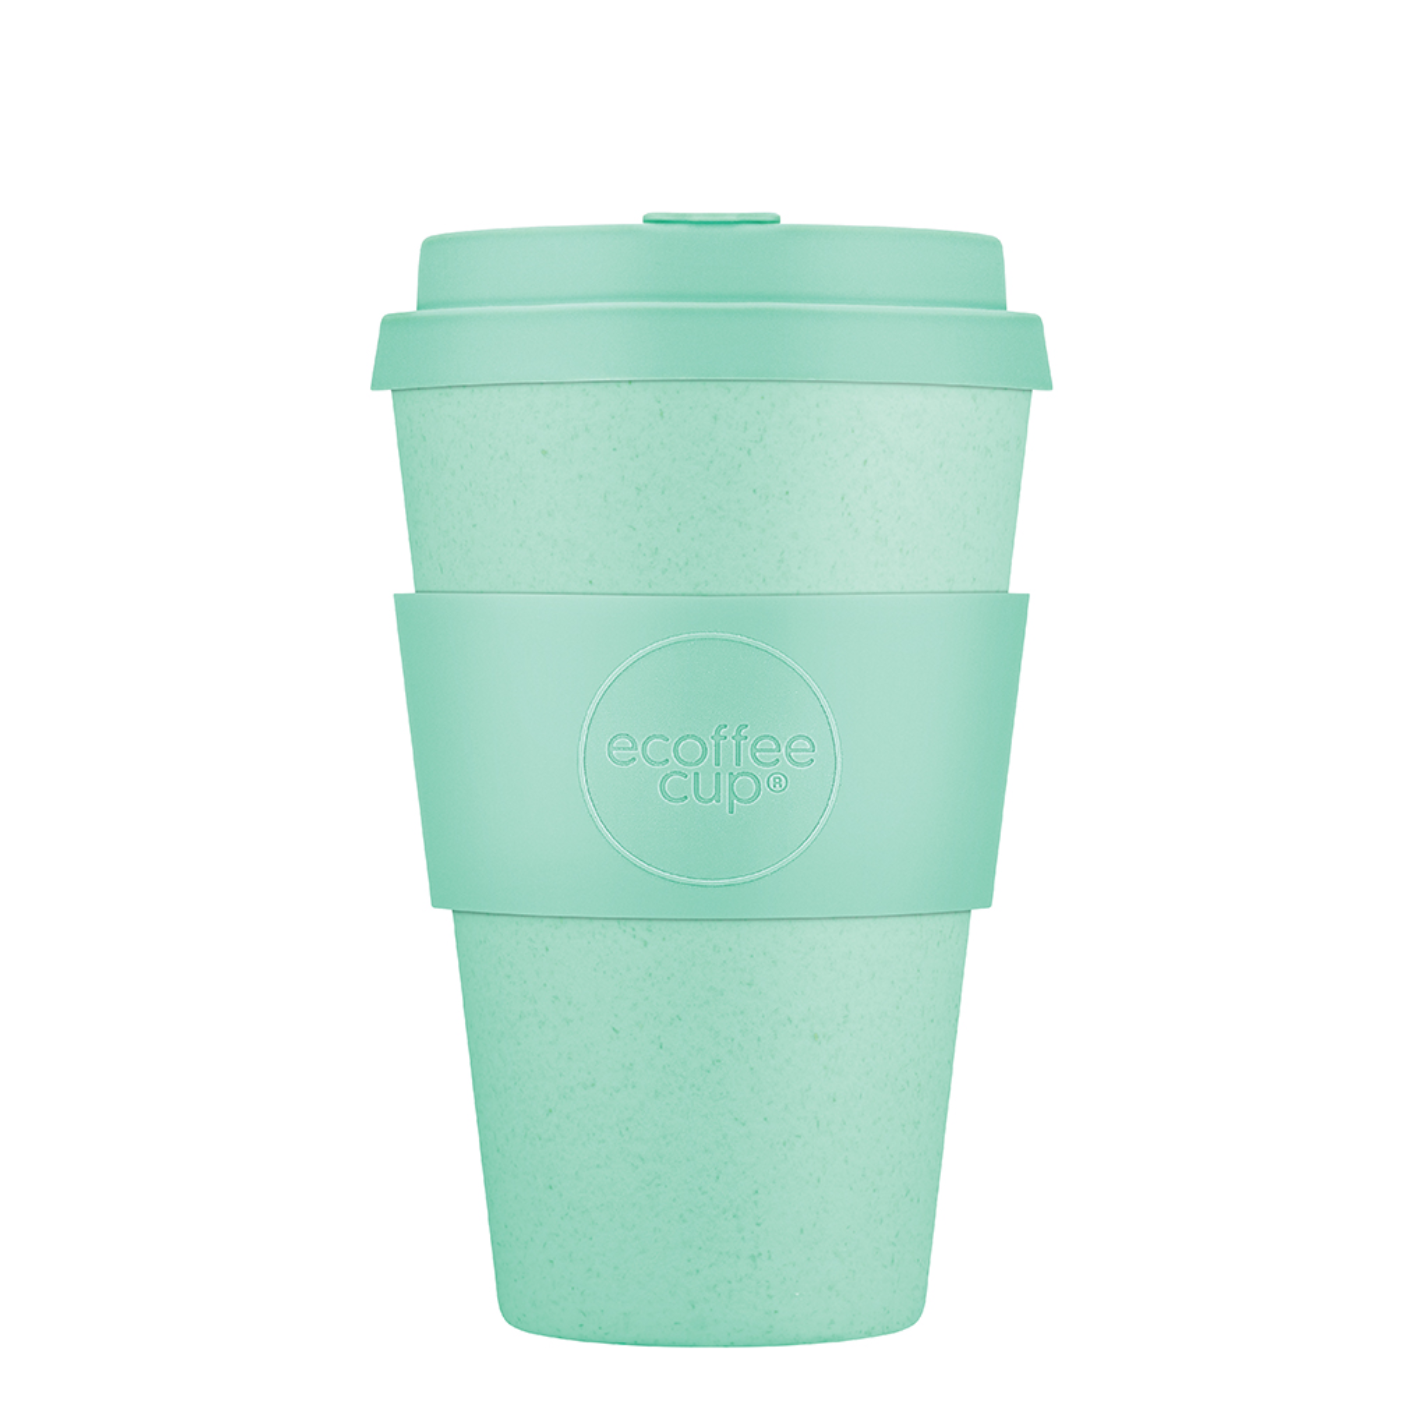 Ecoffee Cup Bamboo Fibre Takeaway Cup Mince Off 14oz 400ml Singapore